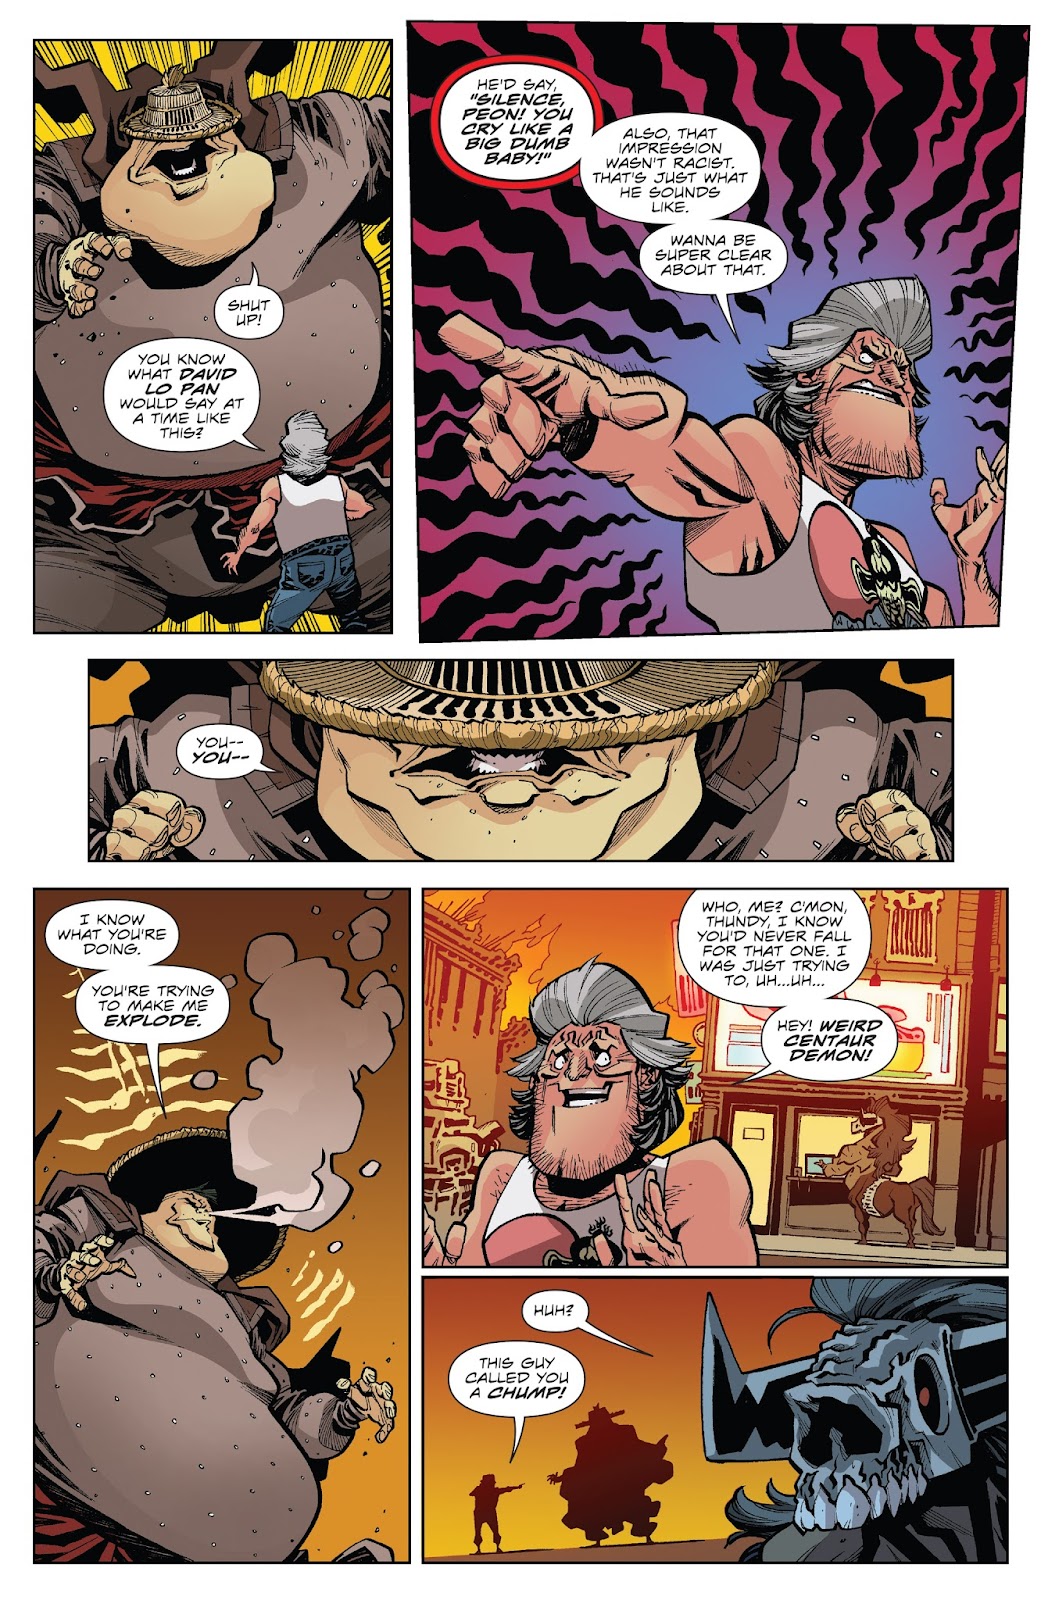 Big Trouble in Little China: Old Man Jack issue 6 - Page 14